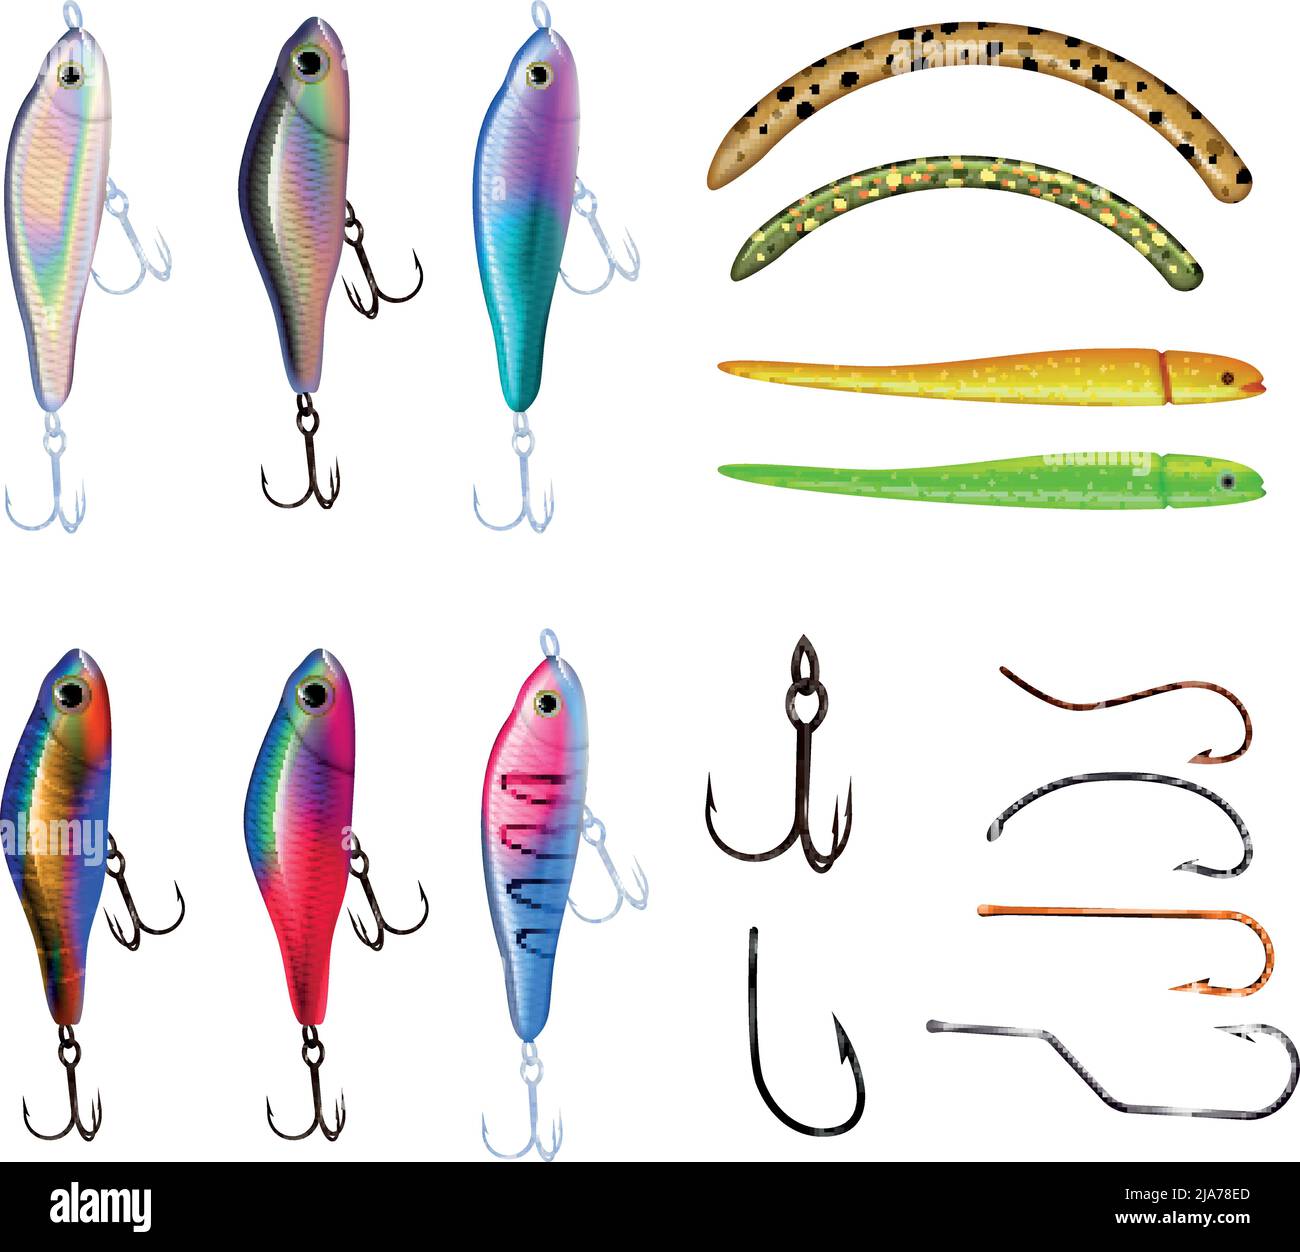 Fishing hooks isolated Stock Vector Images - Page 2 - Alamy